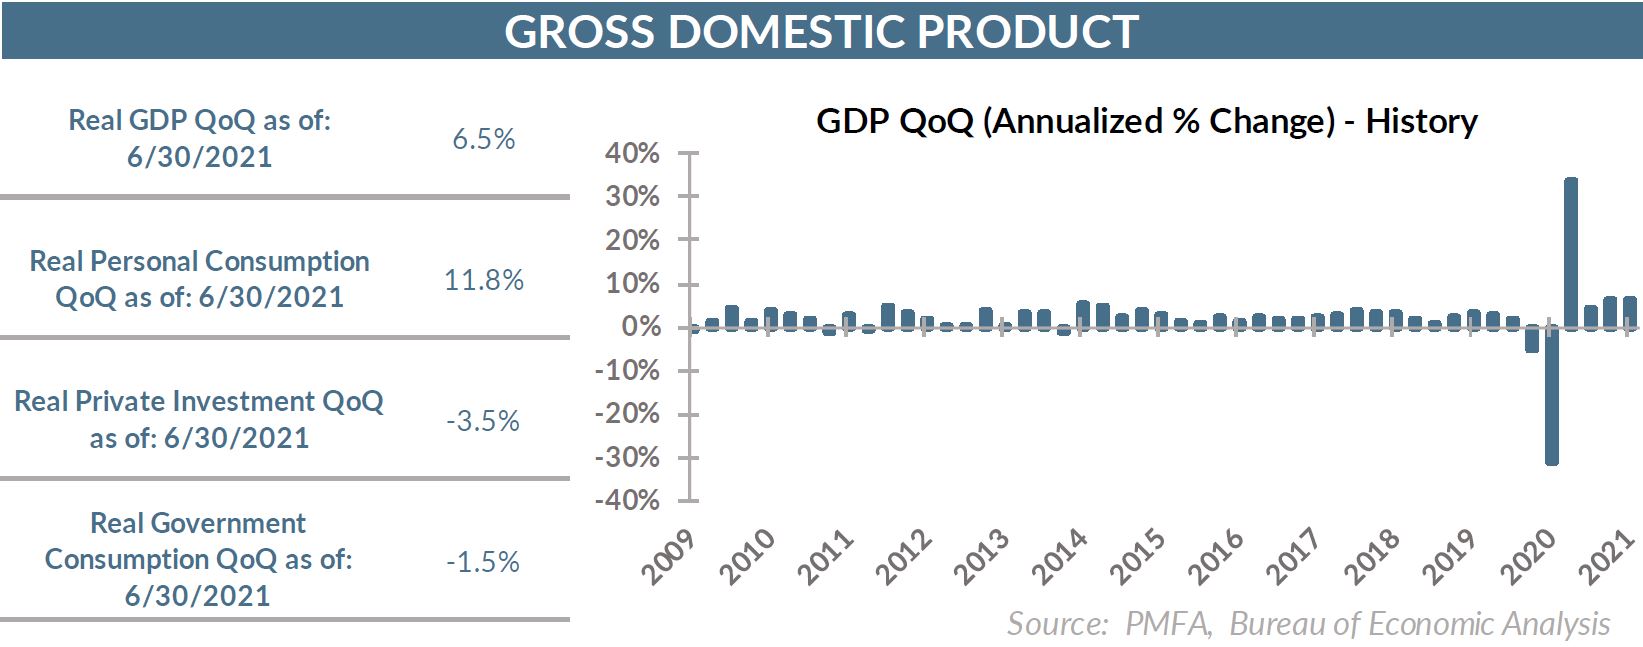 GDP QoQ [Annualized % Change] - History